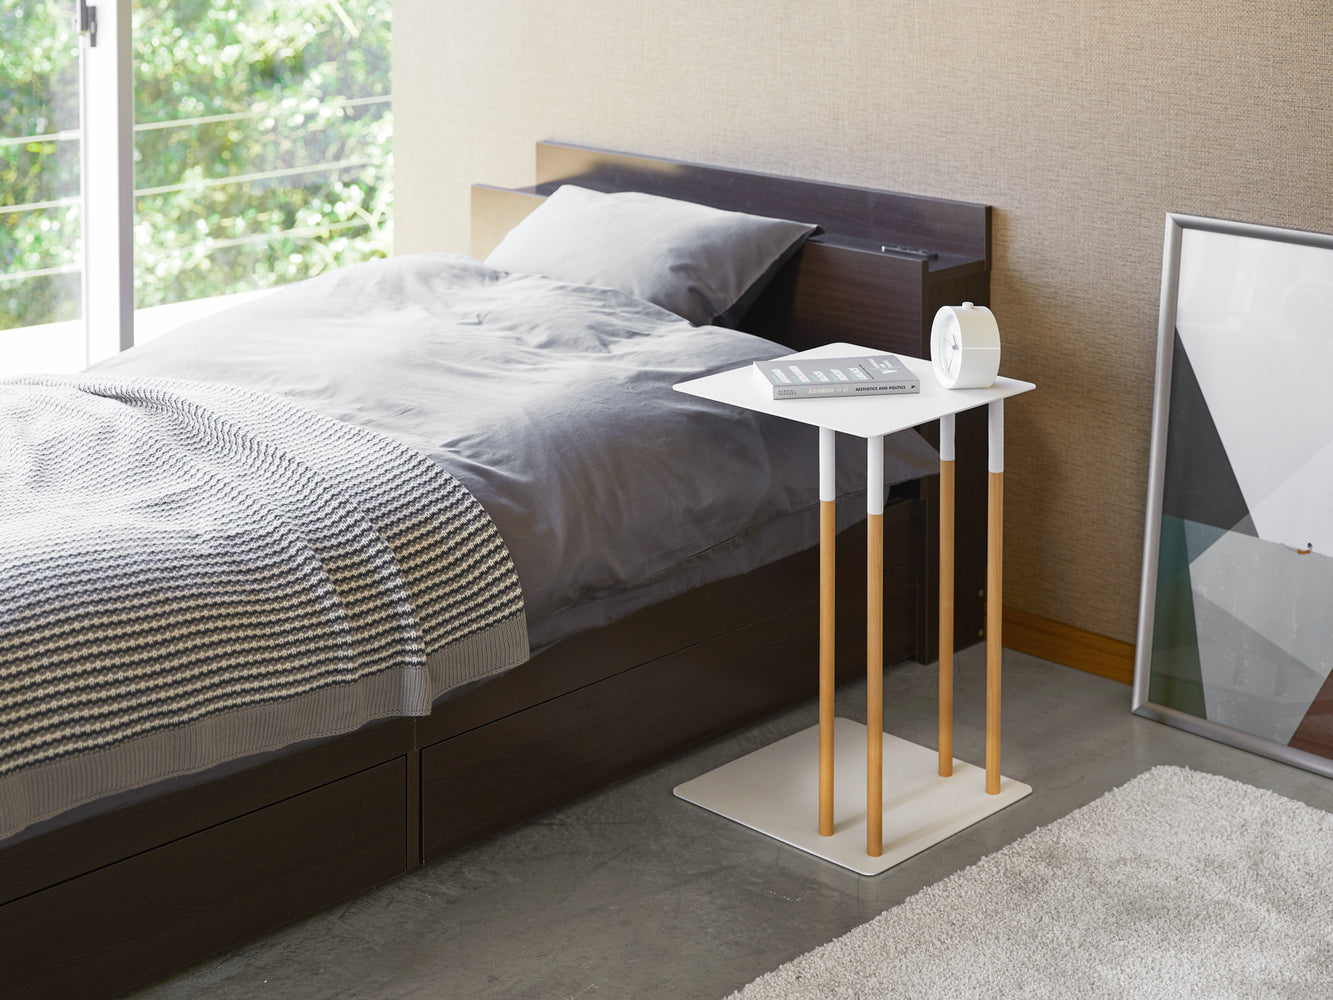 View 4 - White C Side Table displaying book and coffee in bedroom by Yamazaki Home.